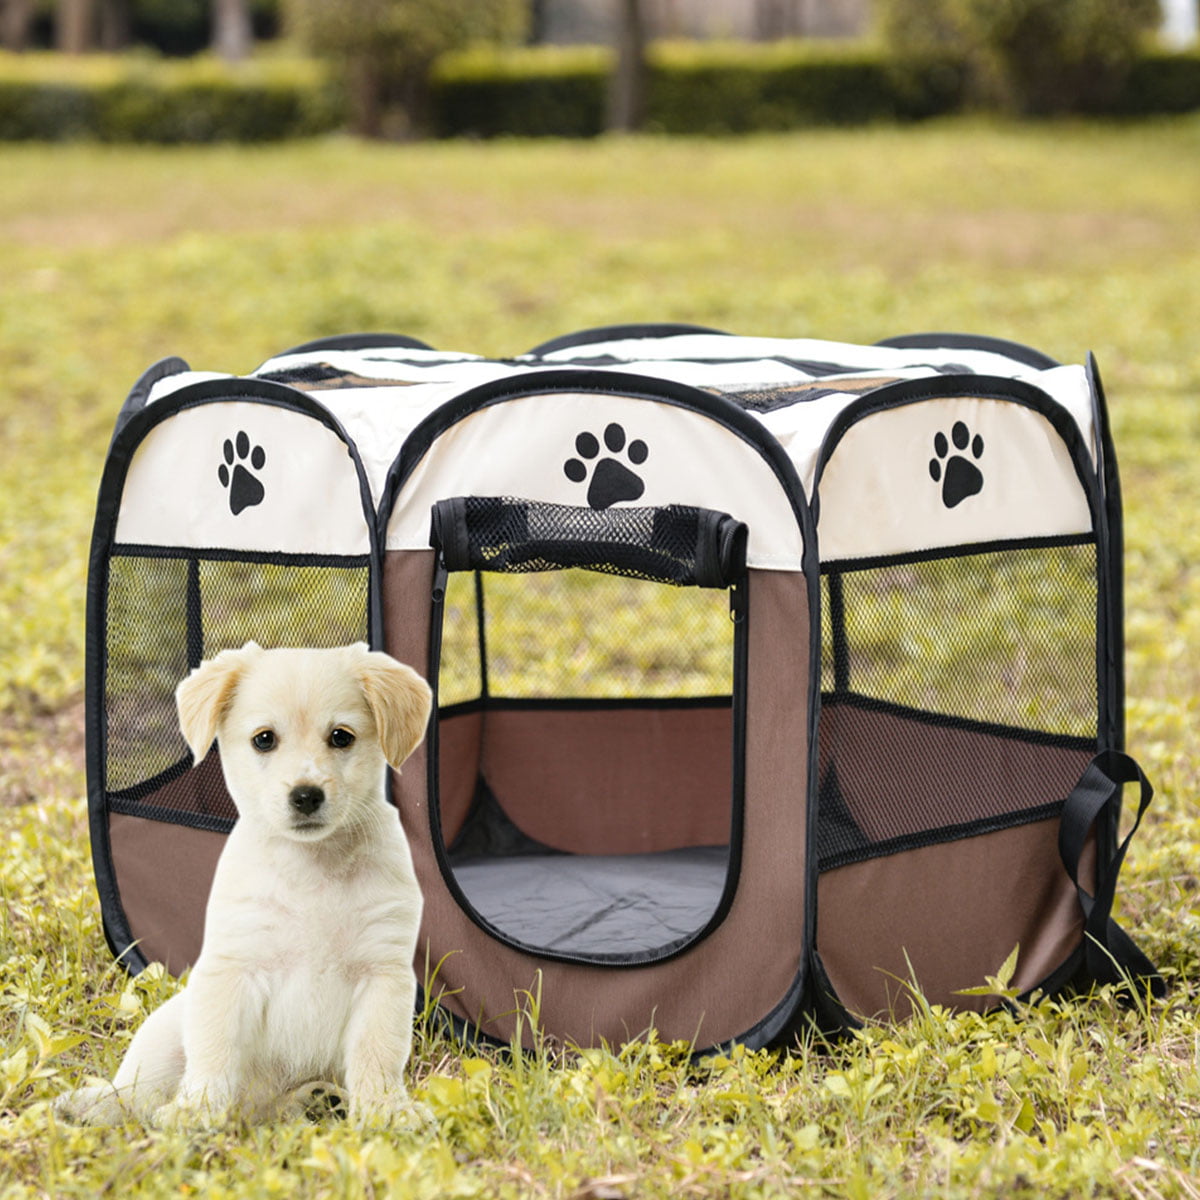 Parkland Pet Portable Foldable Playpen Exercise Kennel Dogs Cats Indoor/Outdoor Removable Mesh Shade Cover 